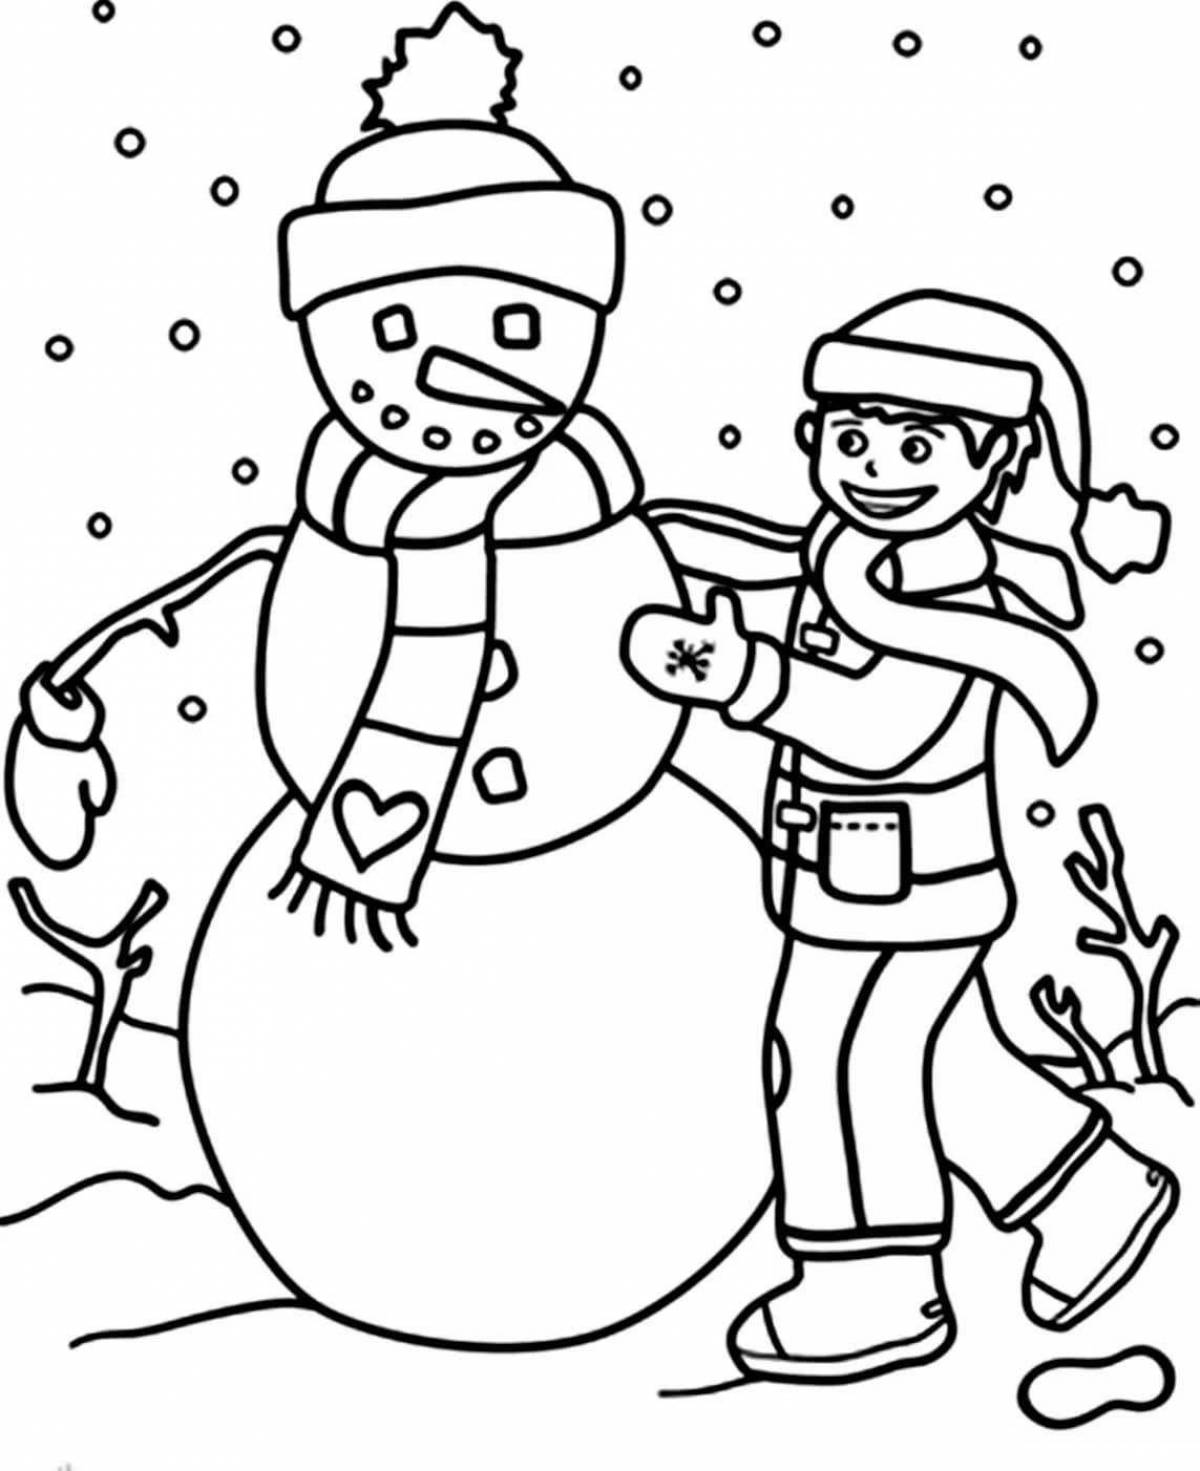 Beautiful winter games coloring page